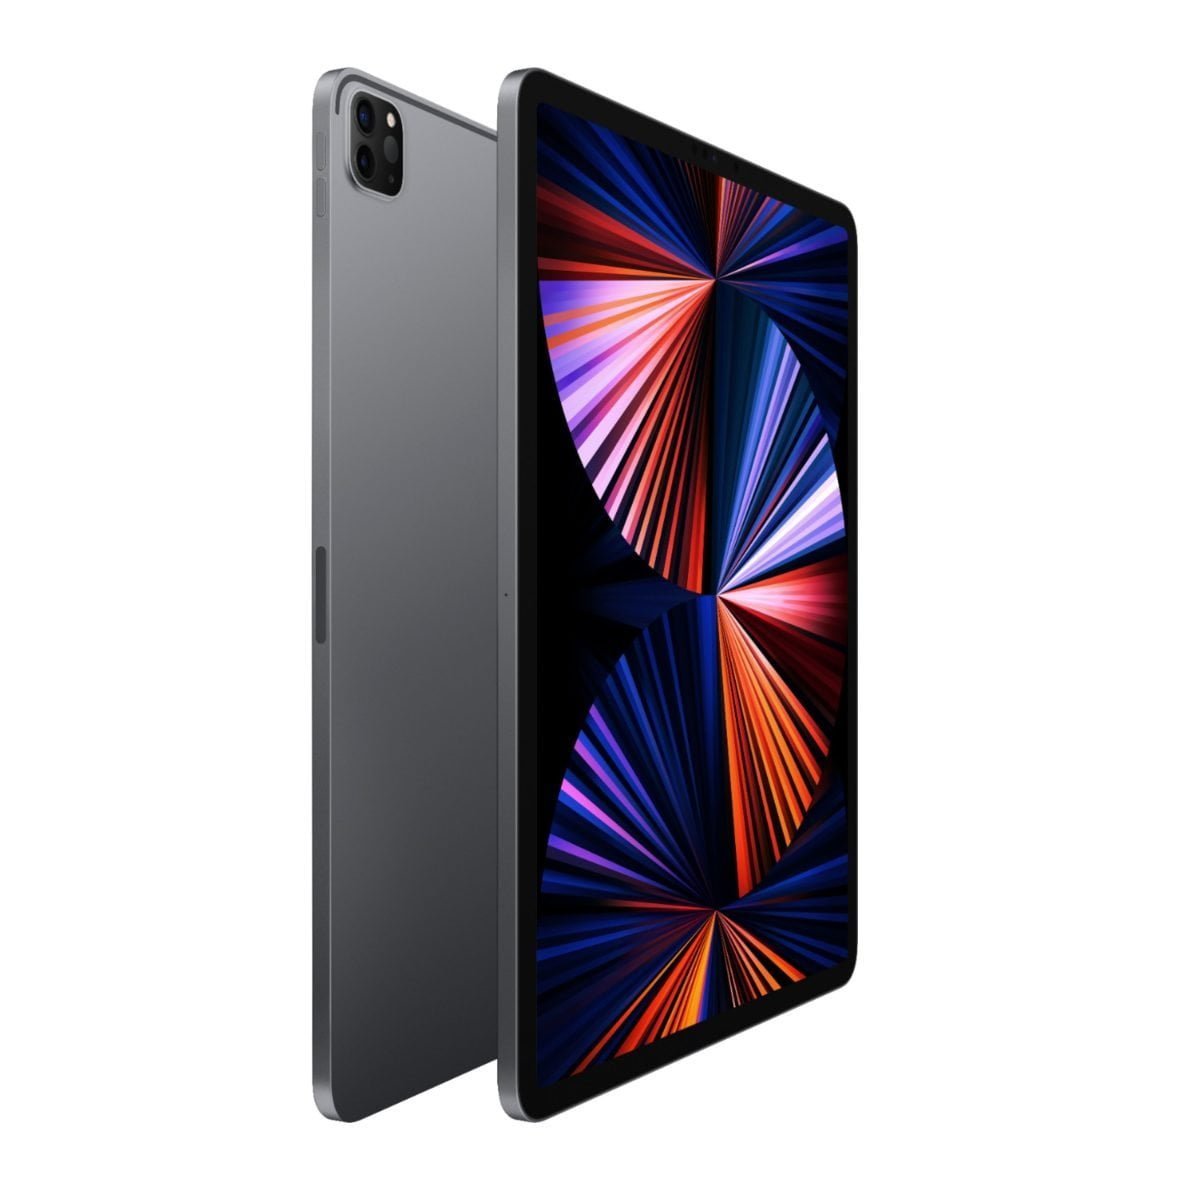 4264603Cv11D Scaled Apple &Lt;H1&Gt;Apple - 12.9-Inch Ipad Pro Latest Model (5Th Generation) With Wi-Fi - 256Gb - Space Gray&Lt;/H1&Gt; Https://Www.youtube.com/Watch?V=Aoq49Euwnio Ipad Pro Features The Powerful Apple M1 Chip For Next-Level Performance And All-Day Battery Life.an Immersive 12.9-Inch Liquid Retina Xdr Display For Viewing And Editing Hdr Photos And Videos. And A Front Camera With Center Stage Keeps You In Frame Automatically During Video Calls. Ipad Pro Has Pro Cameras And A Lidar Scanner For Stunning Photos, Videos, And Immersive Ar. Thunderbolt For Connecting To High-Performance Accessories. And You Can Add Apple Pencil For Note-Taking, Drawing, And Marking Up Documents, And The Magic Keyboard For A Responsive Typing Experience And Trackpad. Ipad Pro Apple - 12.9-Inch Ipad Pro Latest Model (5Th Generation) With Wi-Fi - 256Gb - Space Gray Mhnh3